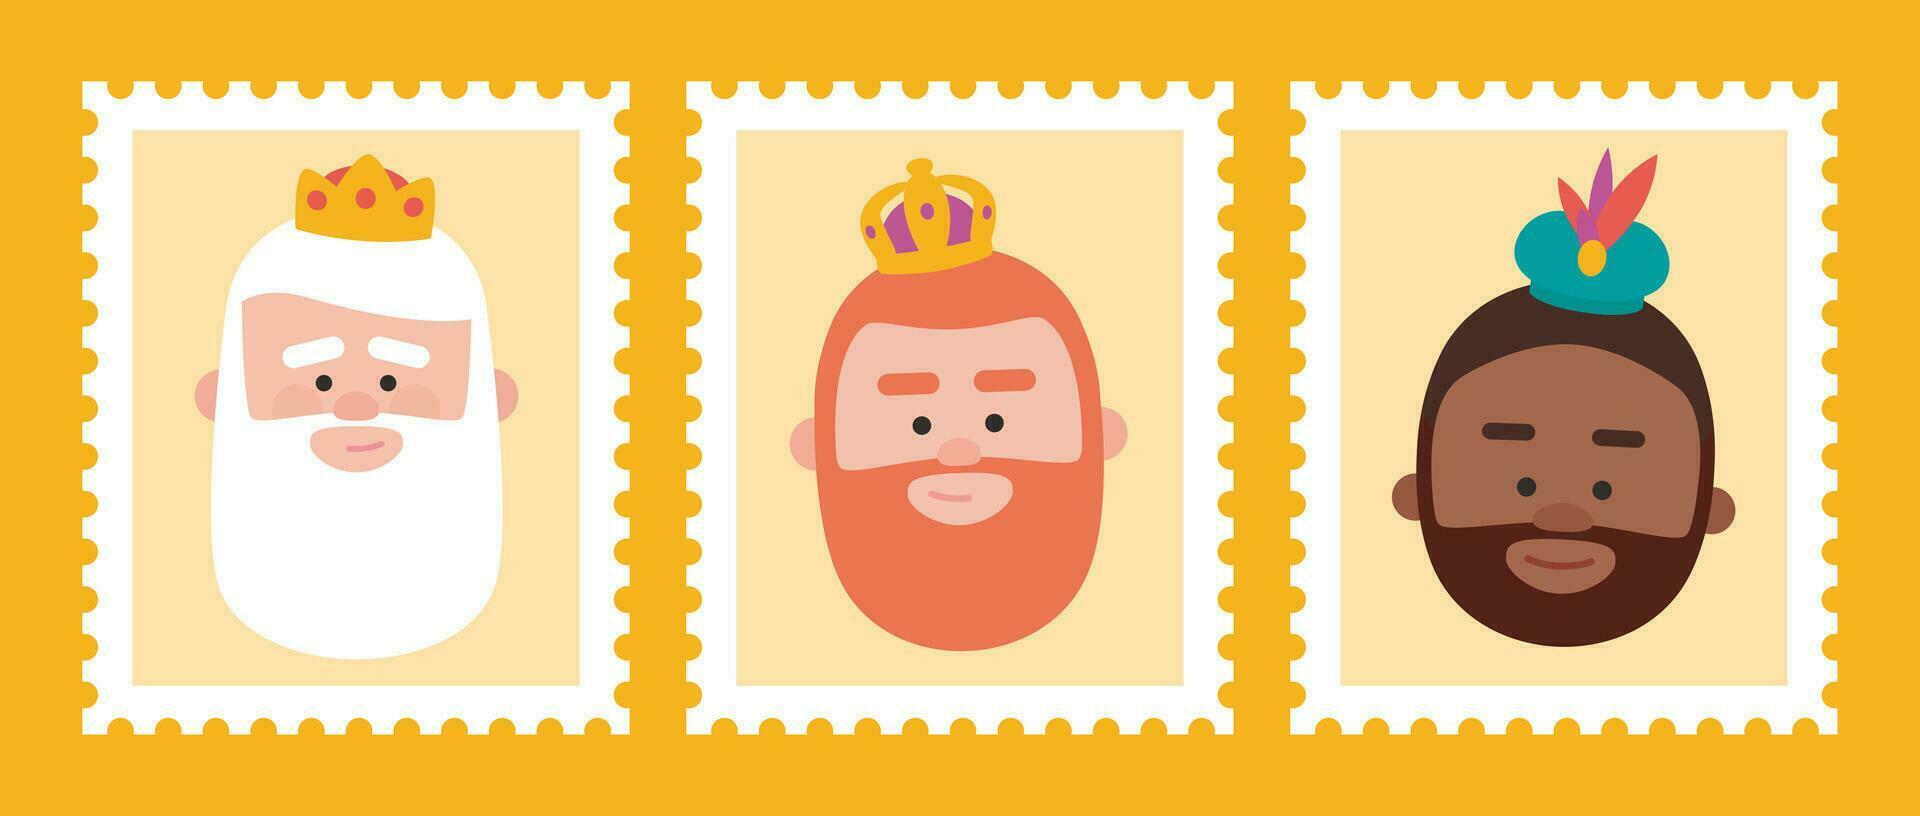 Funny Yellow Stamps packs of the wise men. The three kings of orient, Melchior, Gaspard and Balthazar. vector